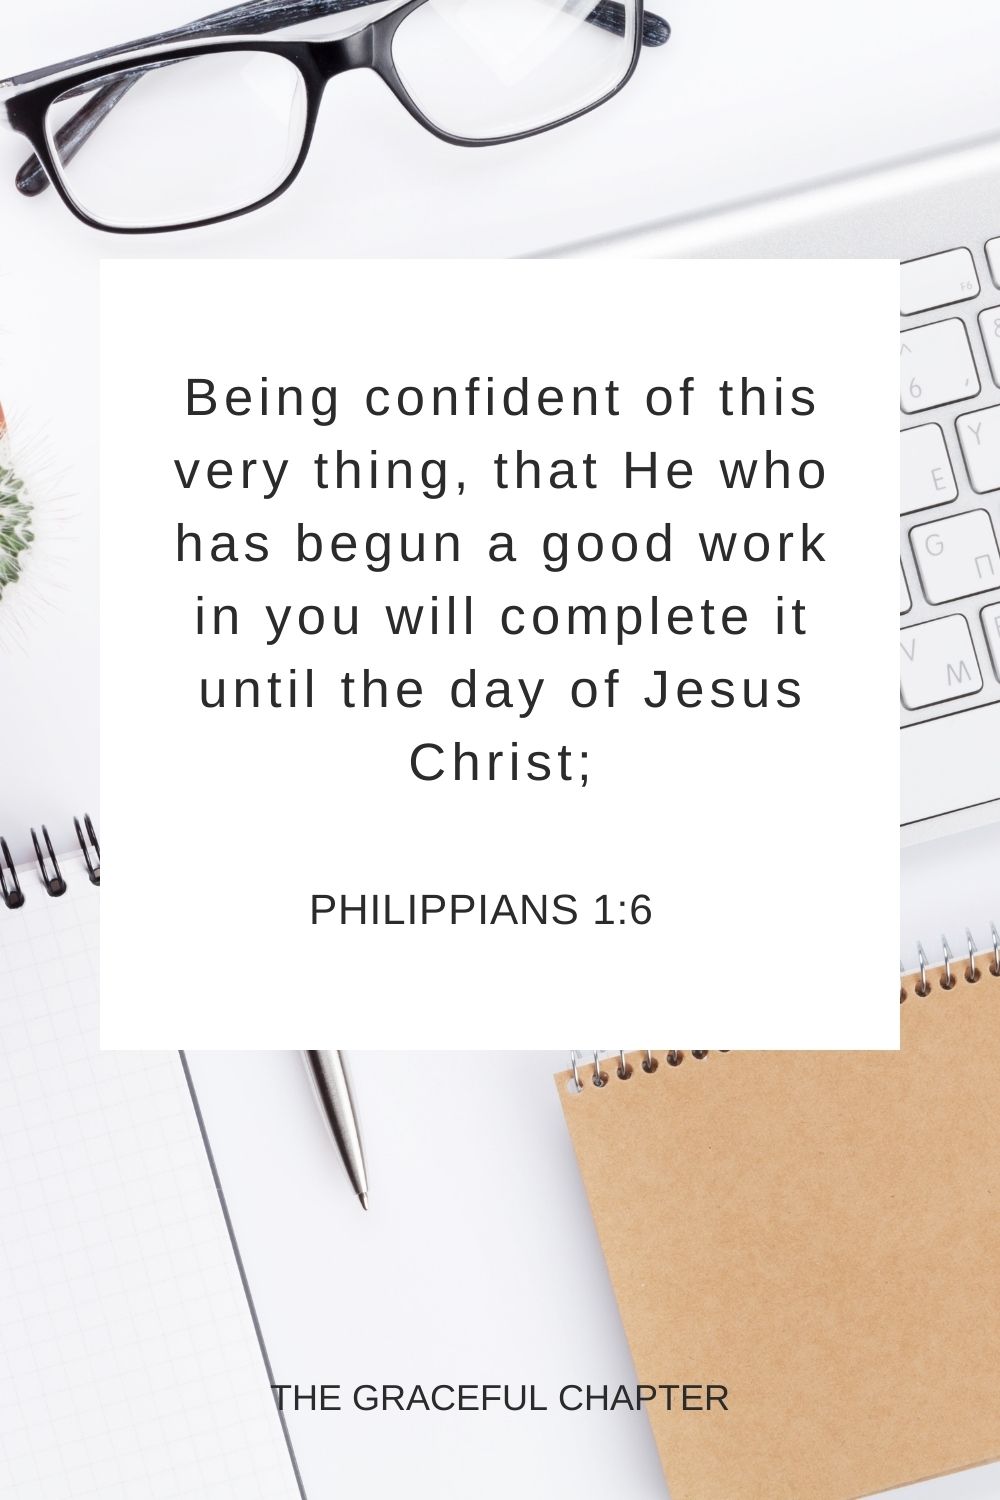 Being confident of this very thing, that He who has begun a good work in you will complete it until the day of Jesus Christ; Philippians 1:6